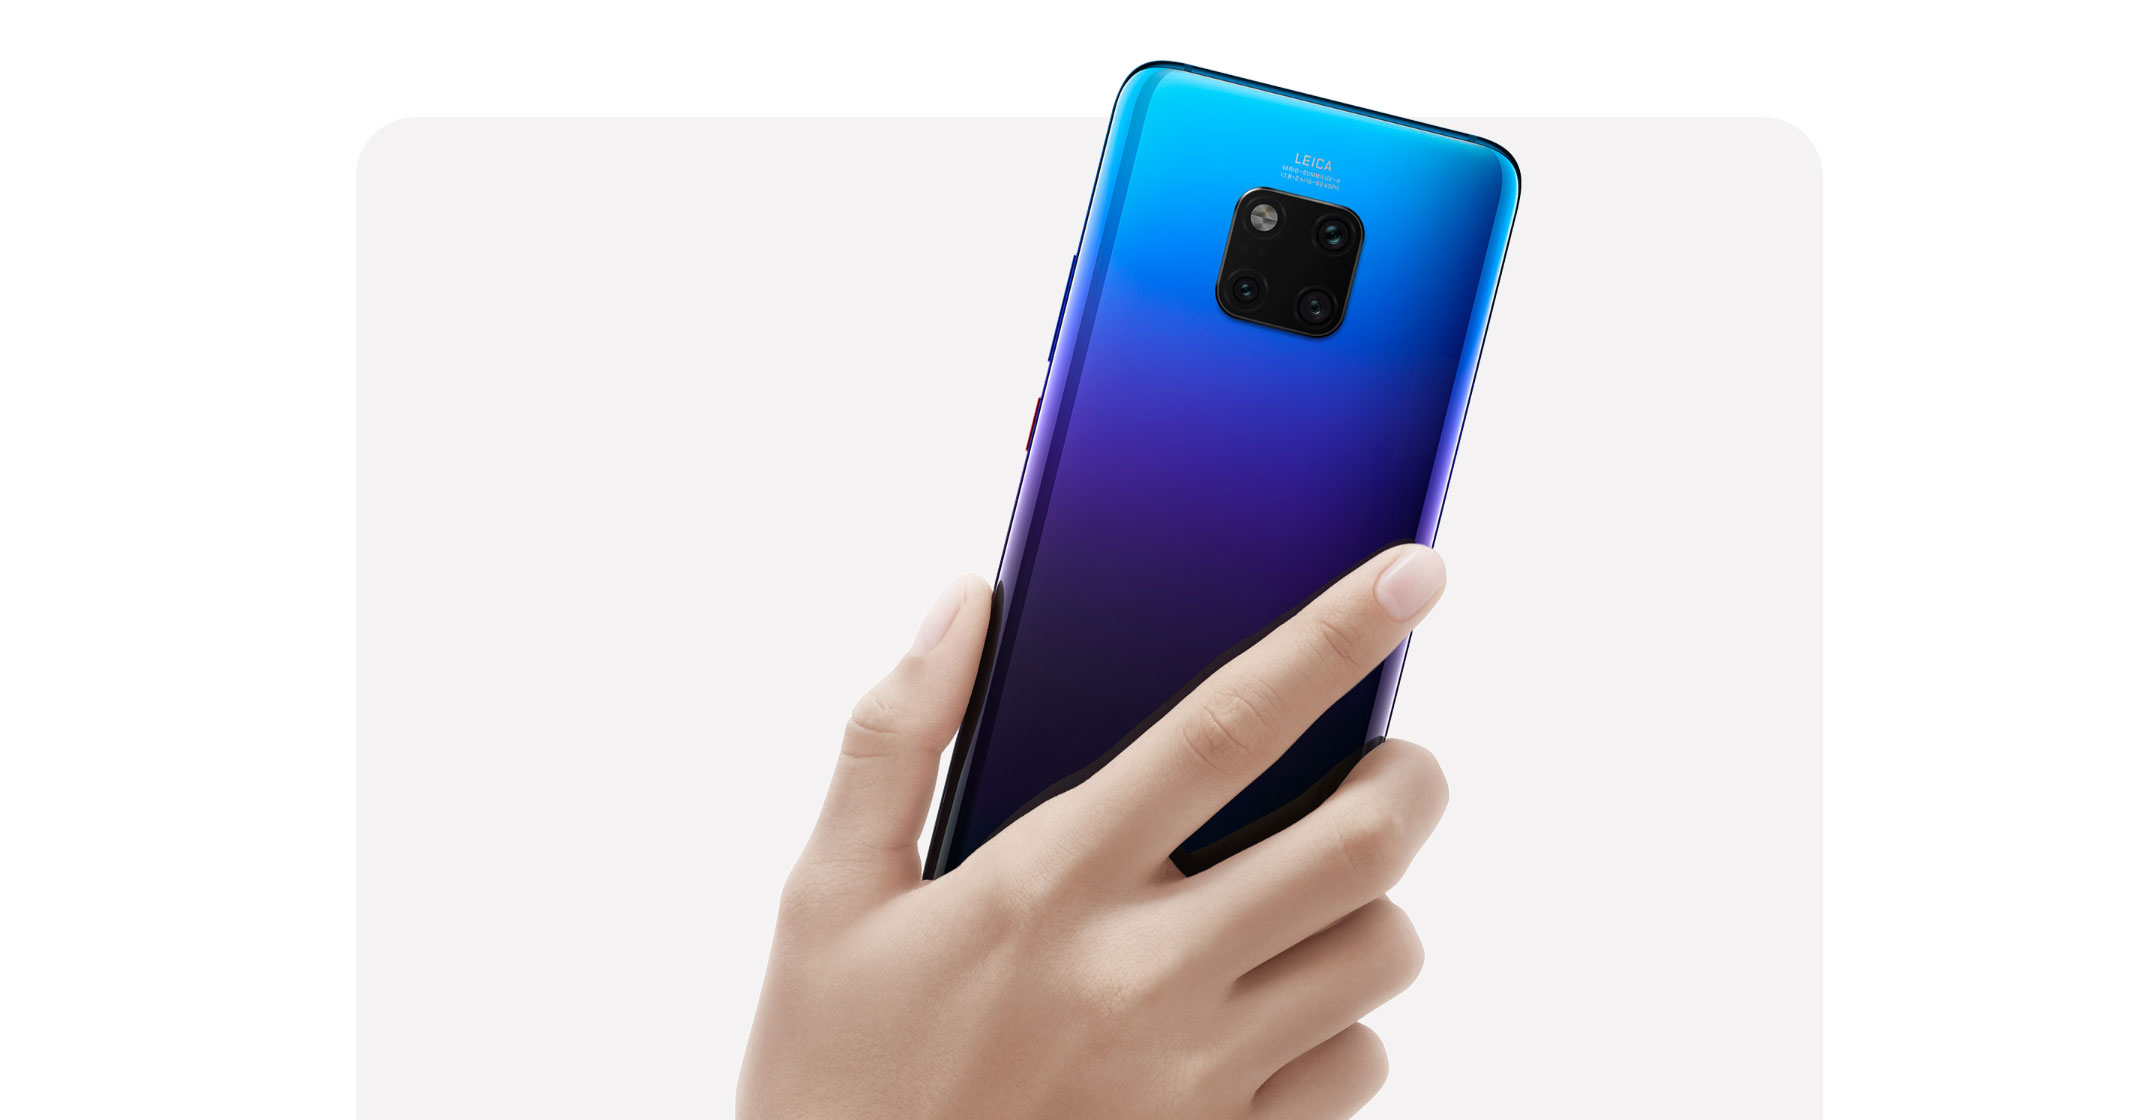 Huawei Mate 20 Pro: there's a new king in town - TechCentral